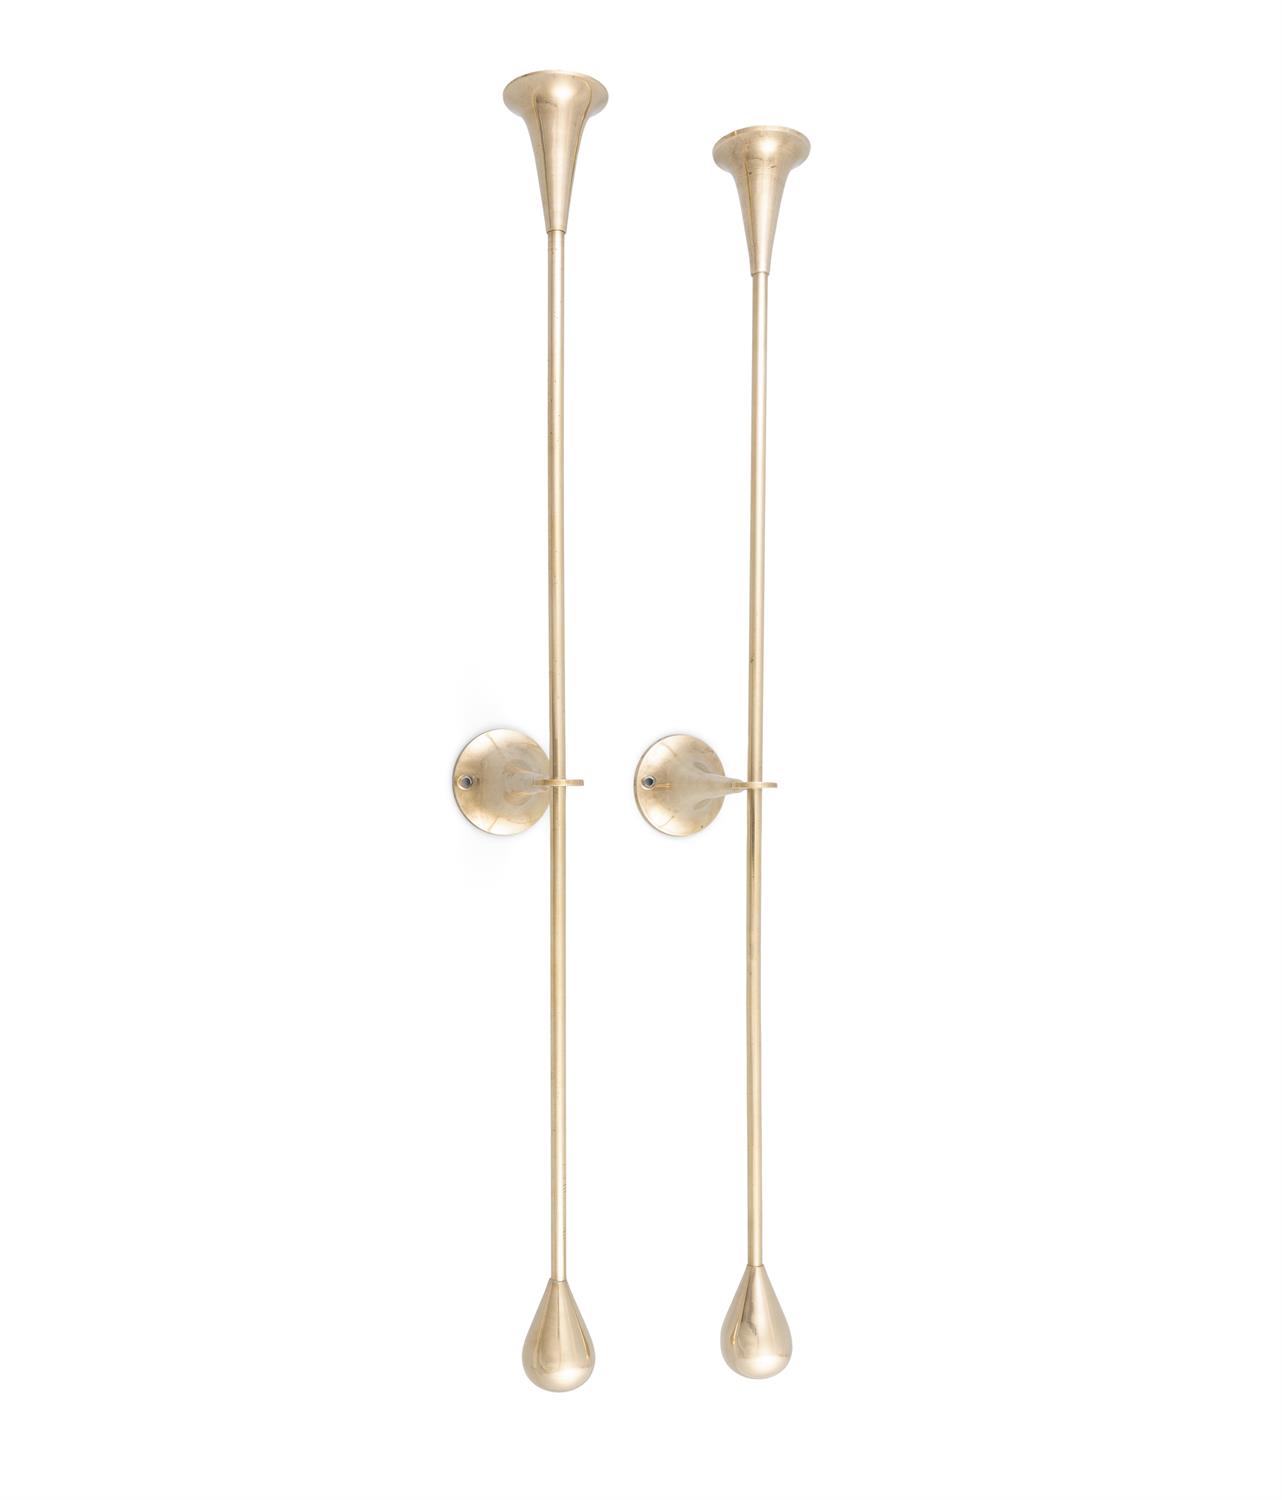 IN THE MANNER OF PIERRE FORSSELL A pair of brass wall candle-holders - Image 2 of 5